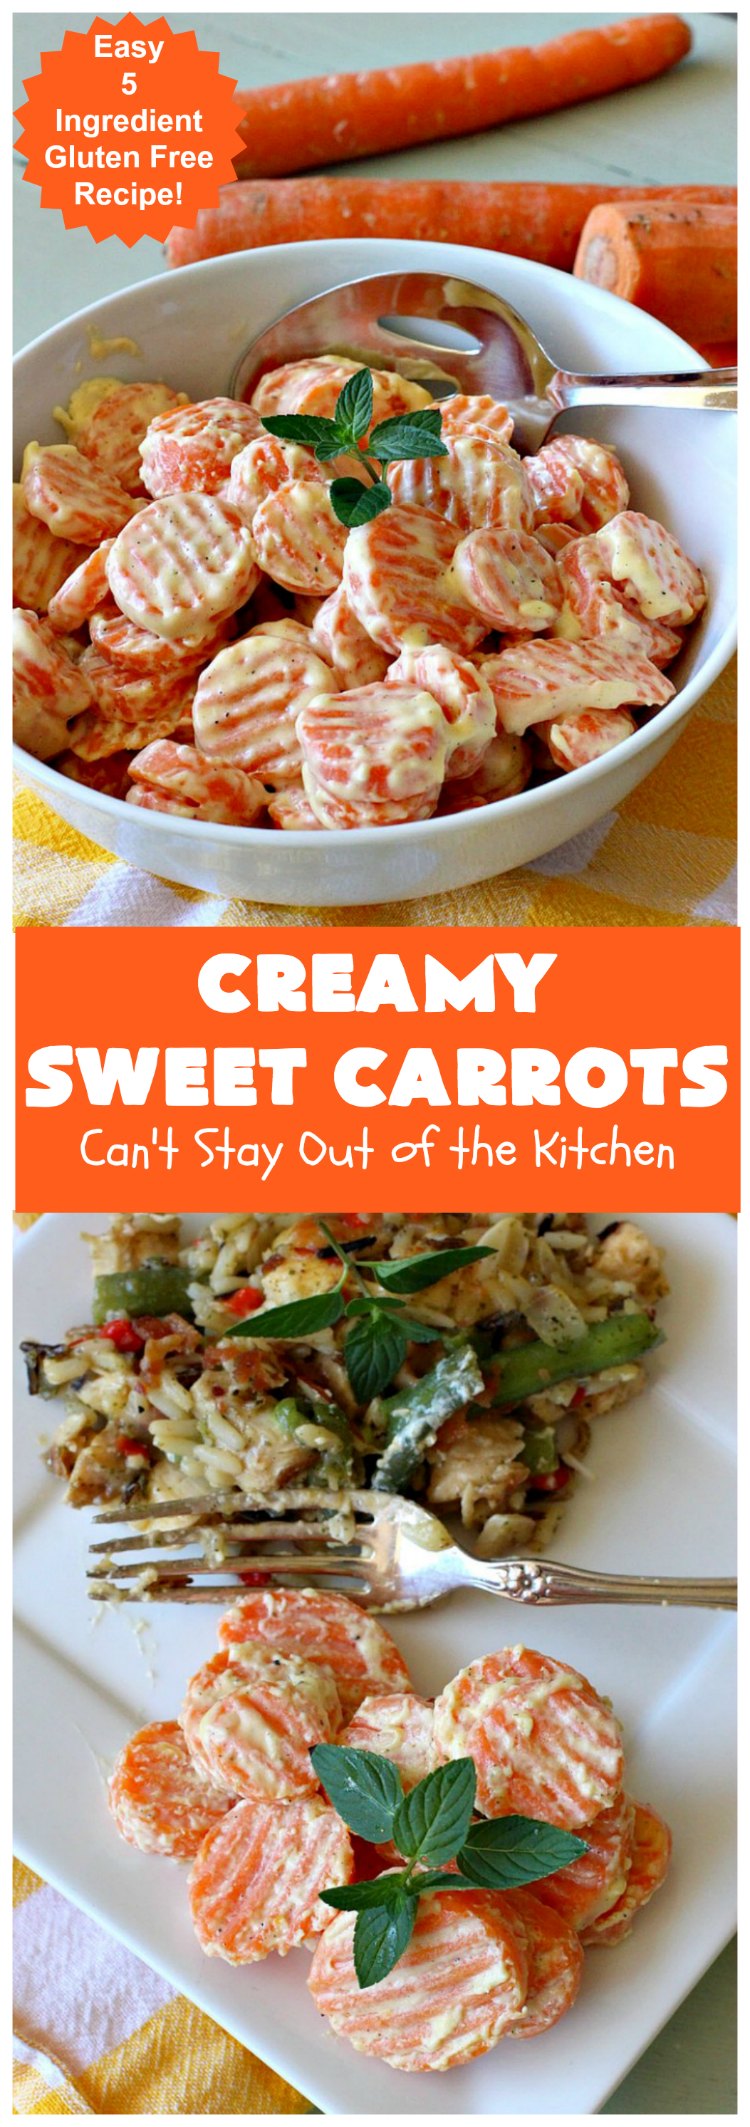 Creamy Sweet Carrots | Can't Stay Out of the Kitchen